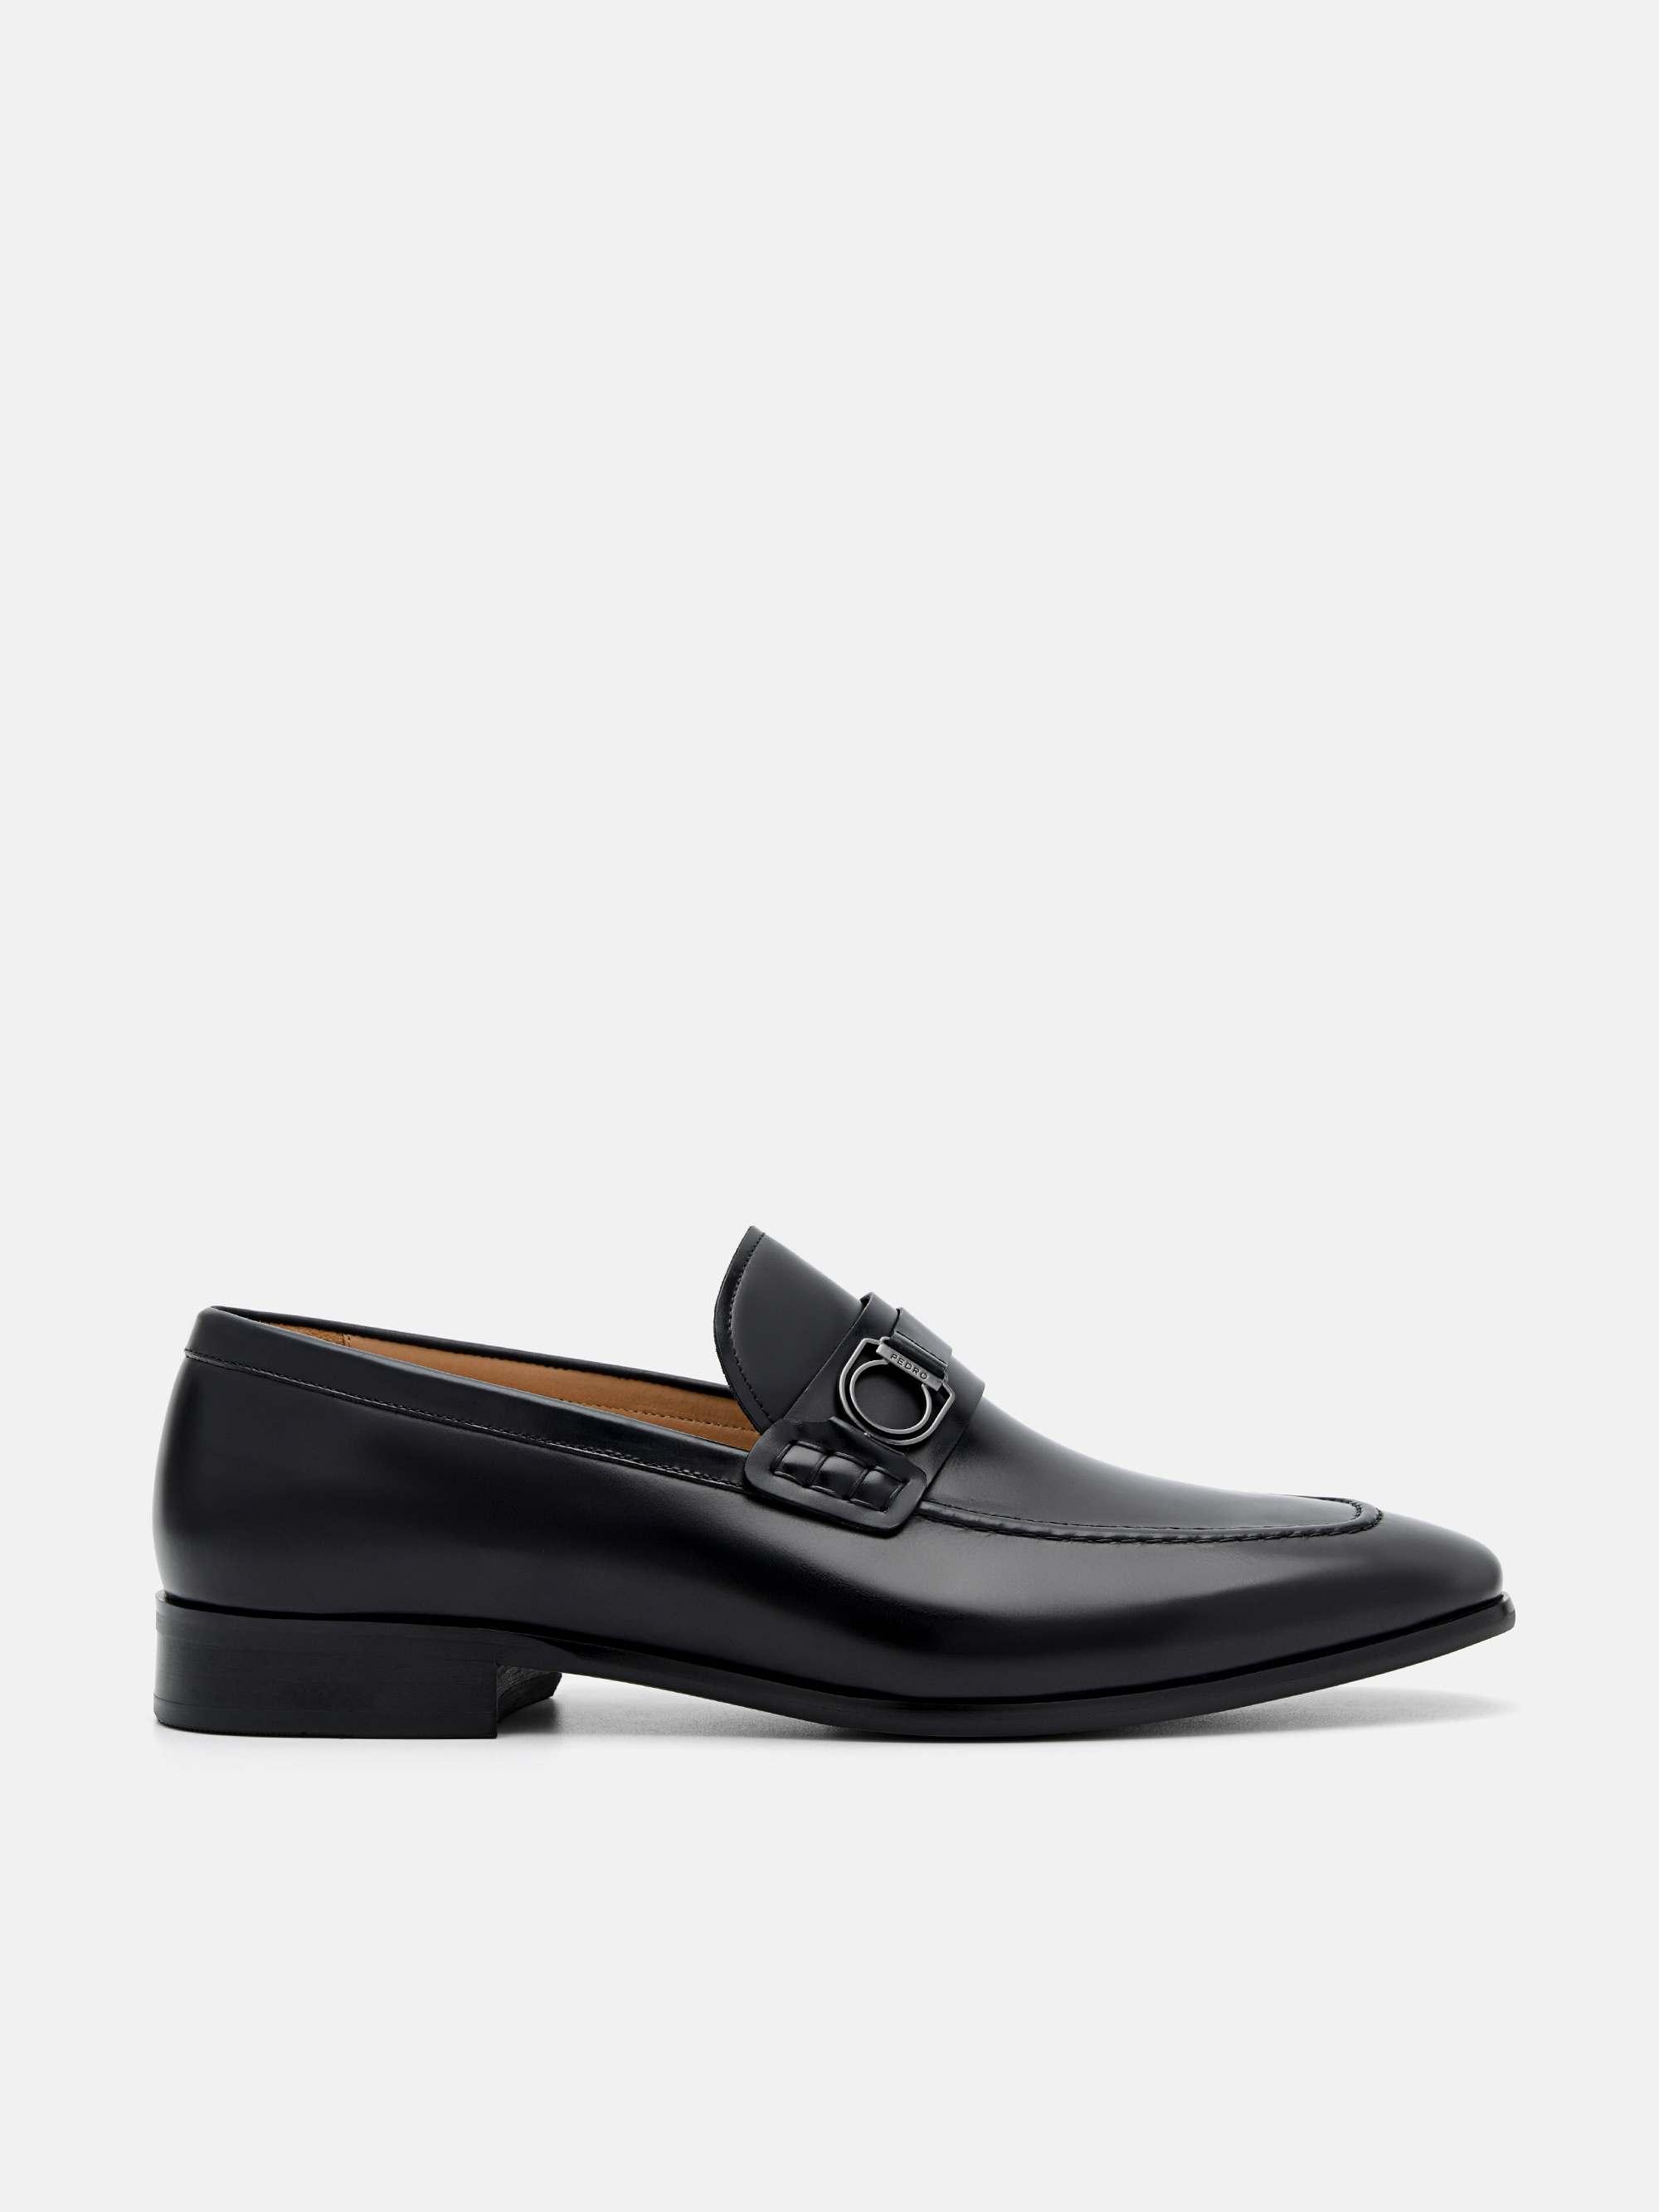 Black Leather Buckle Loafers - PEDRO PH